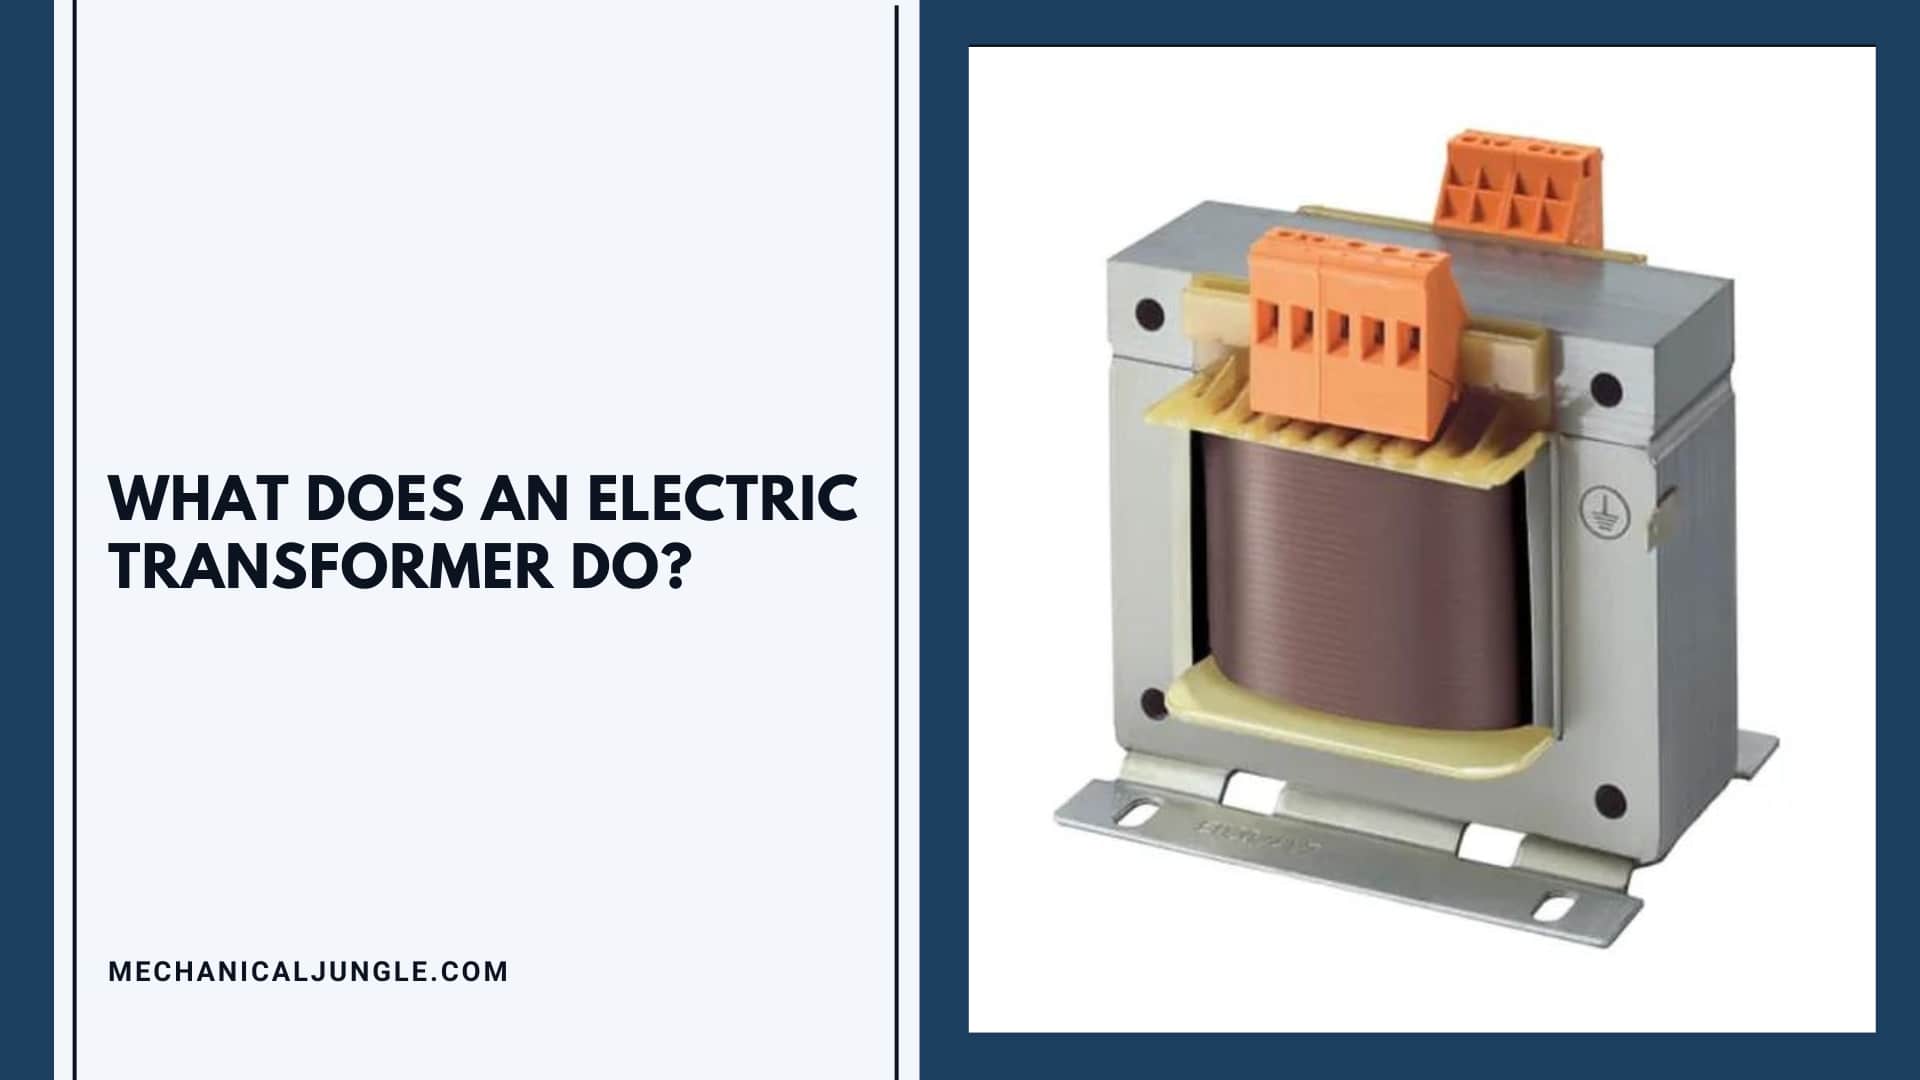 What Does an Electric Transformer Do?